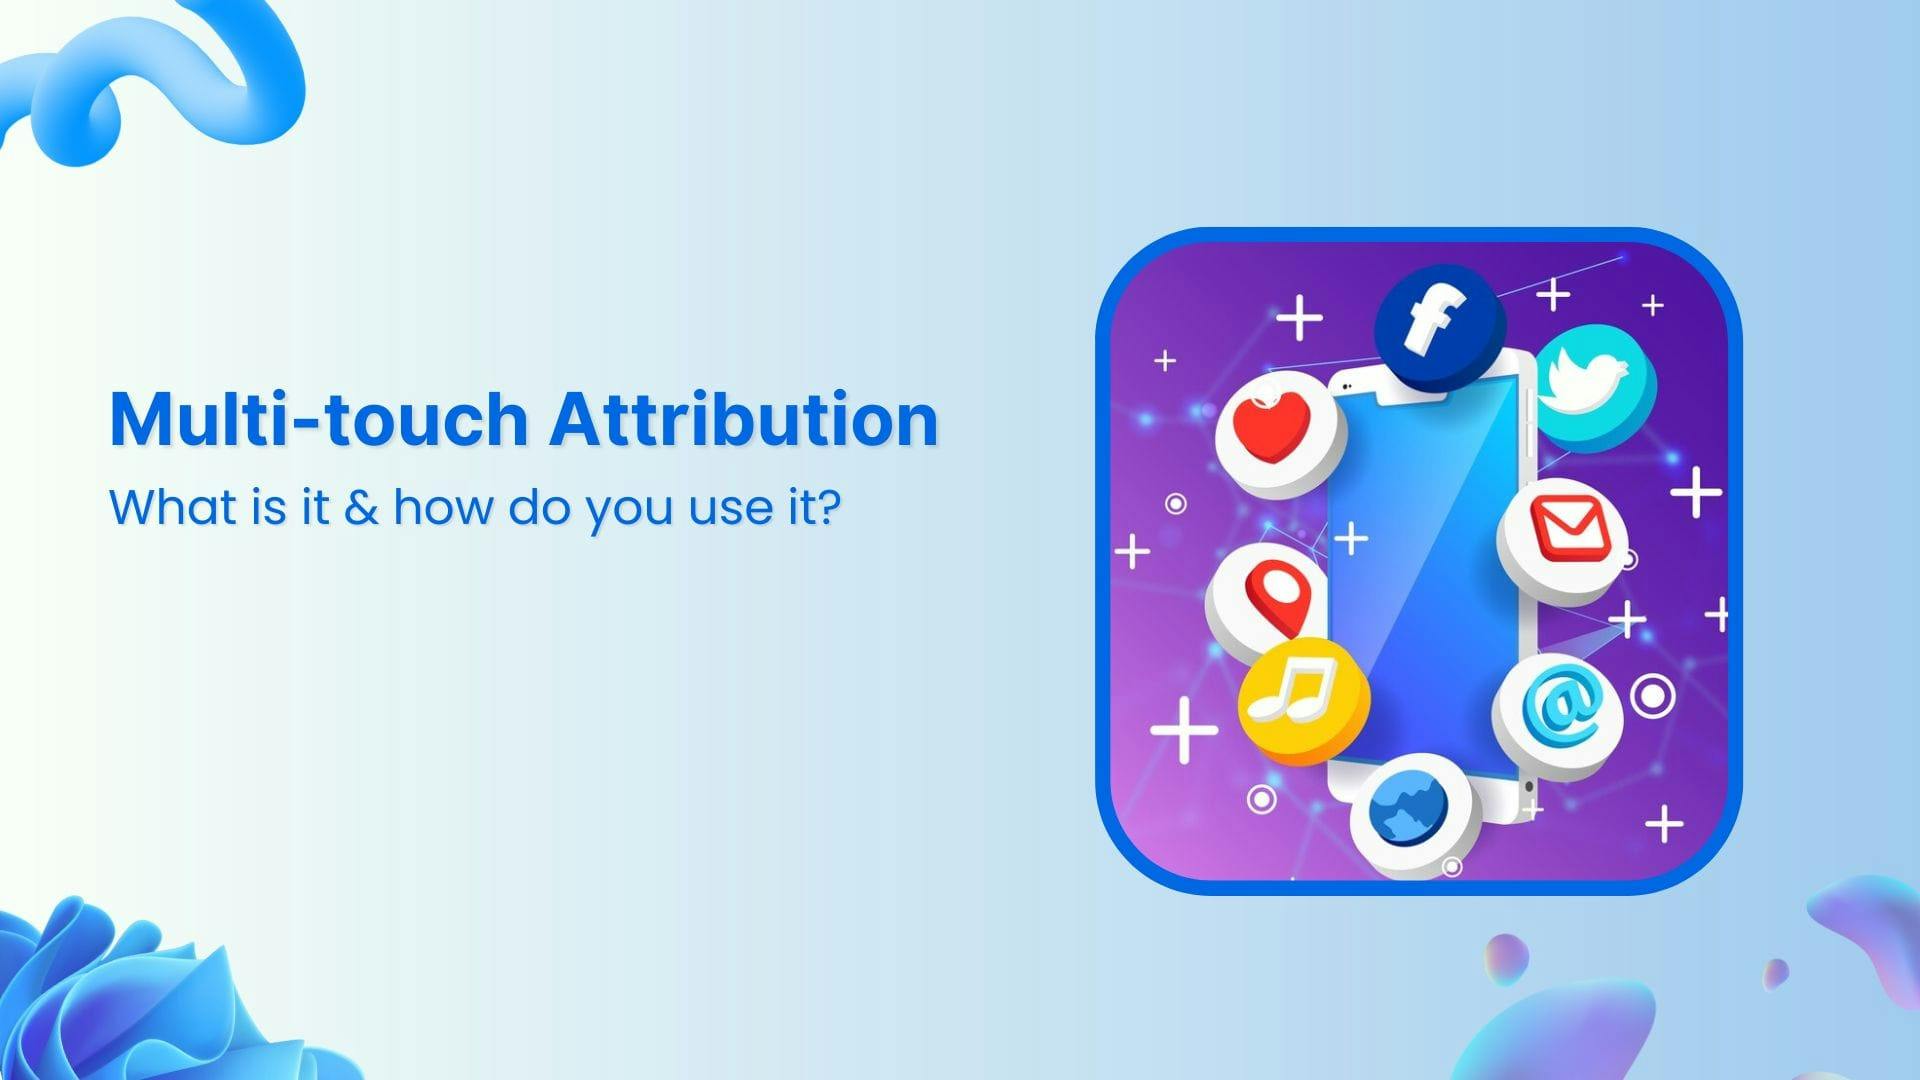 Multi-touch attribution: What is it & how do you use it?